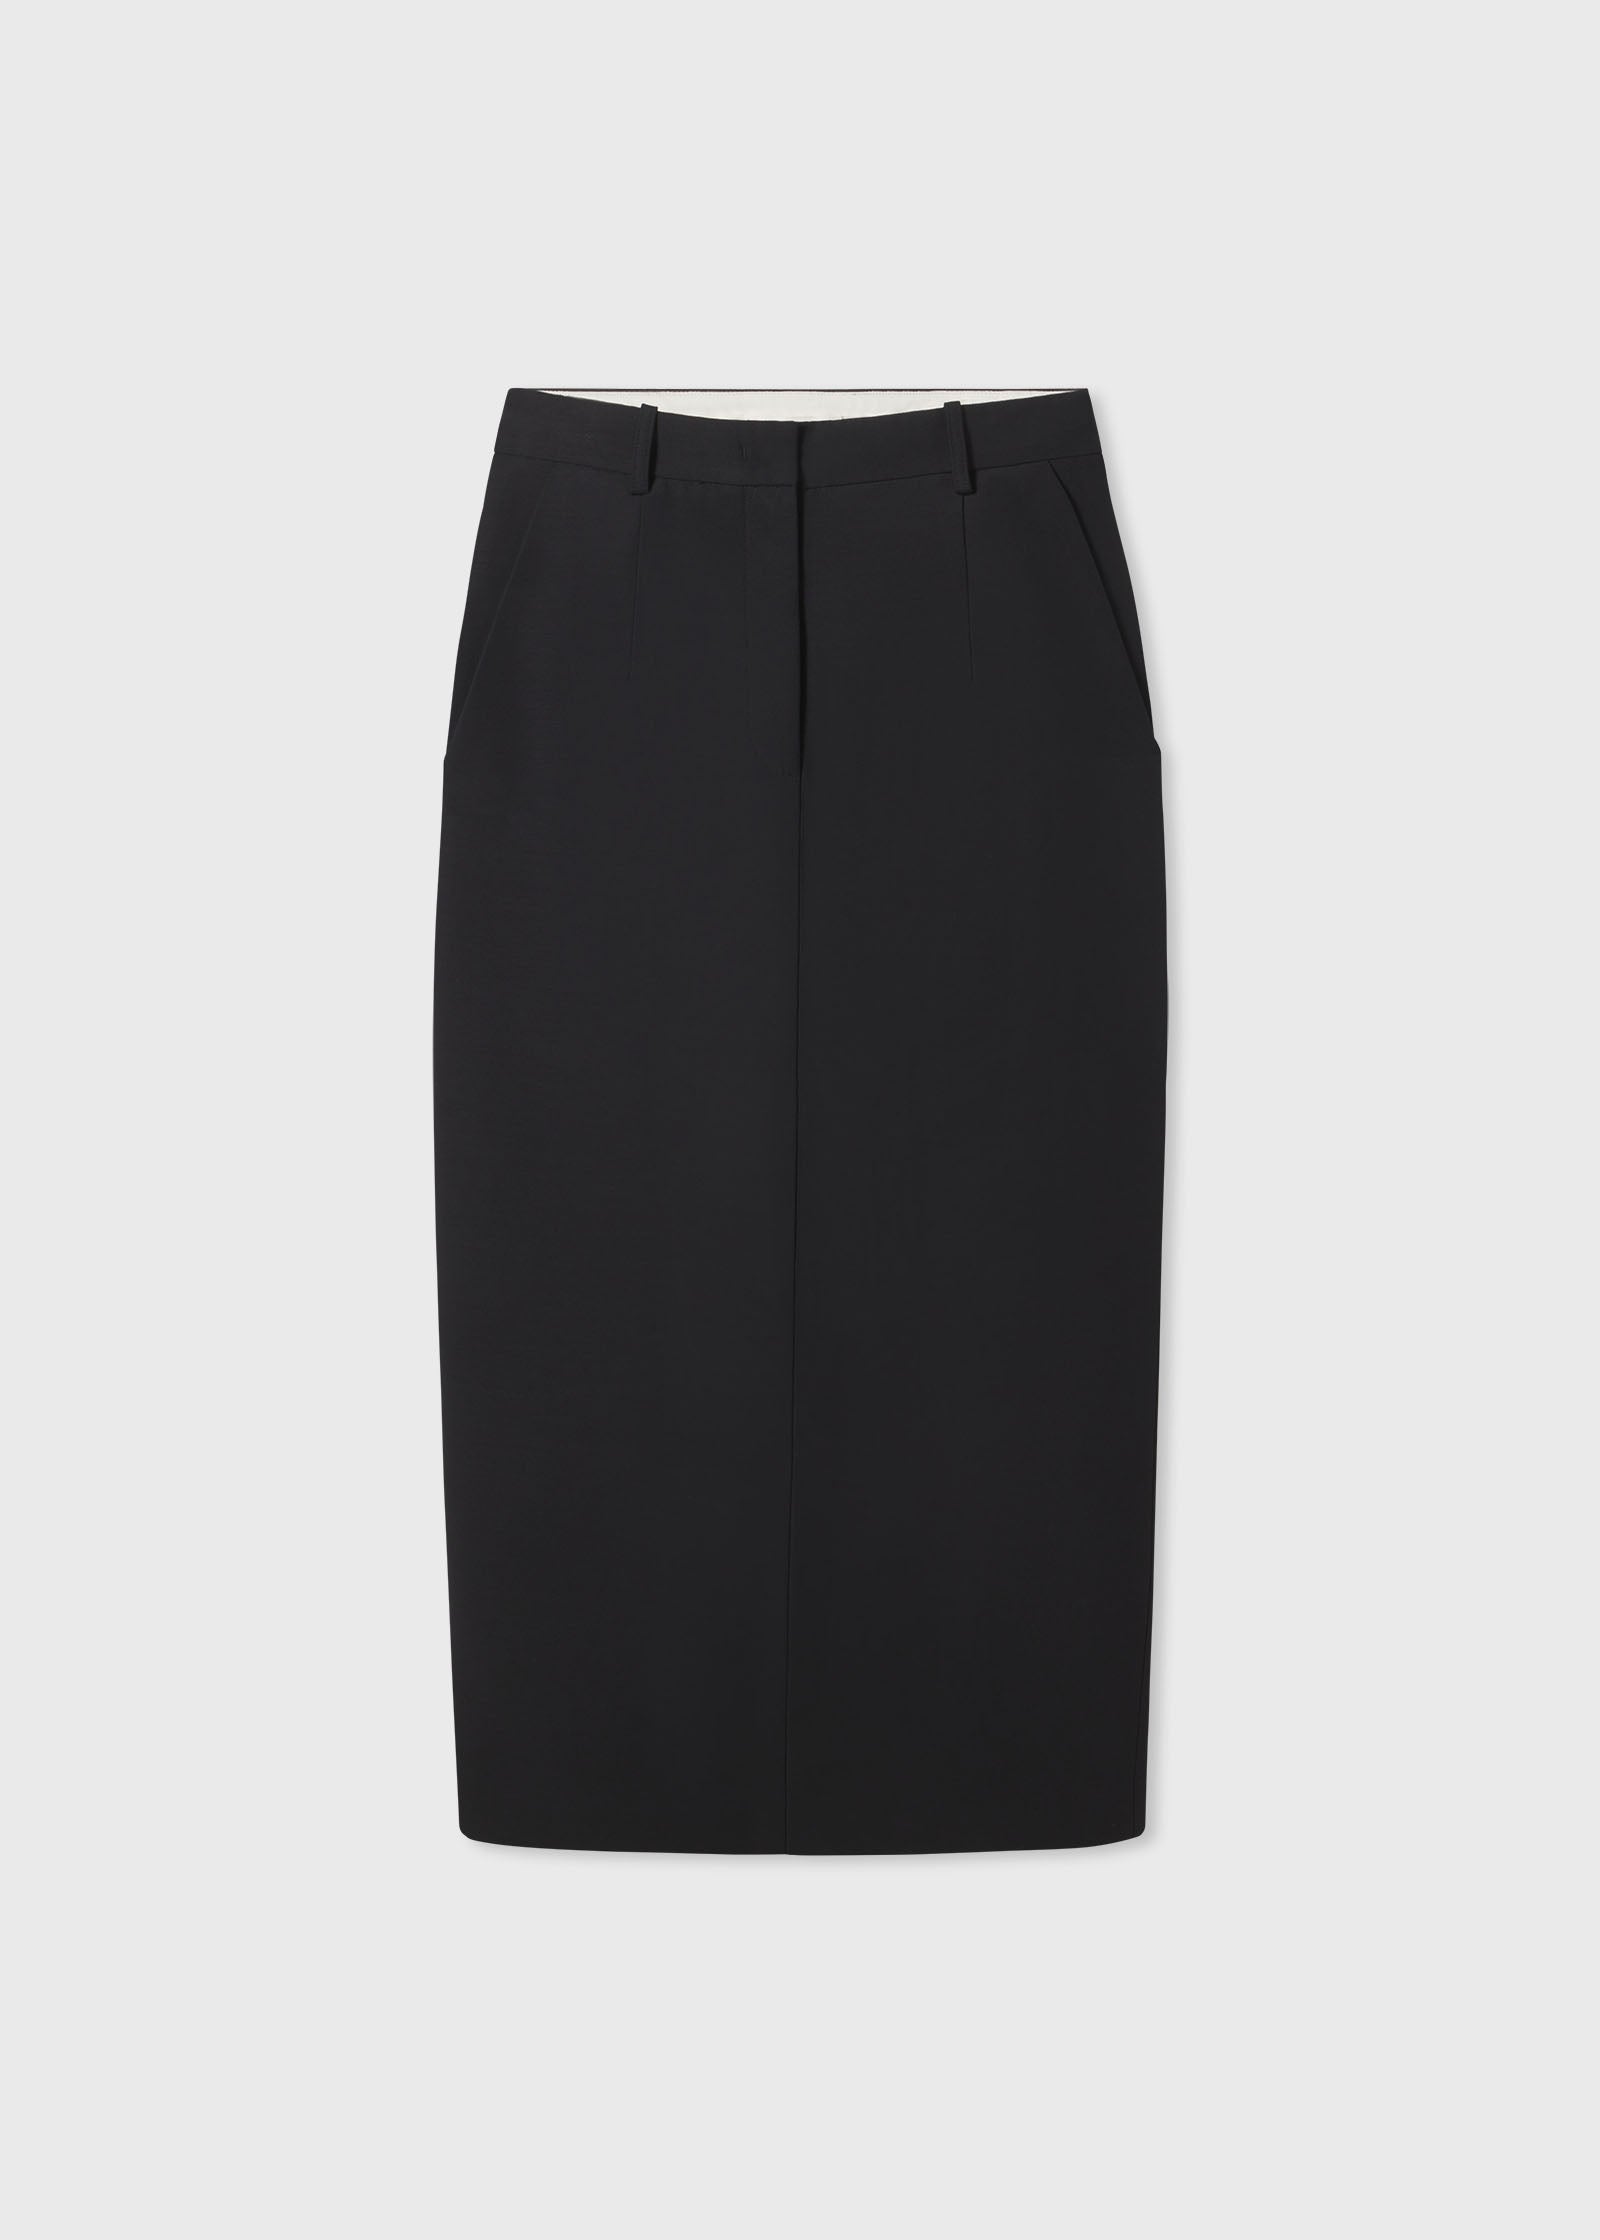 Tailored Pencil Skirt in Smooth Faille - Black - CO Collections